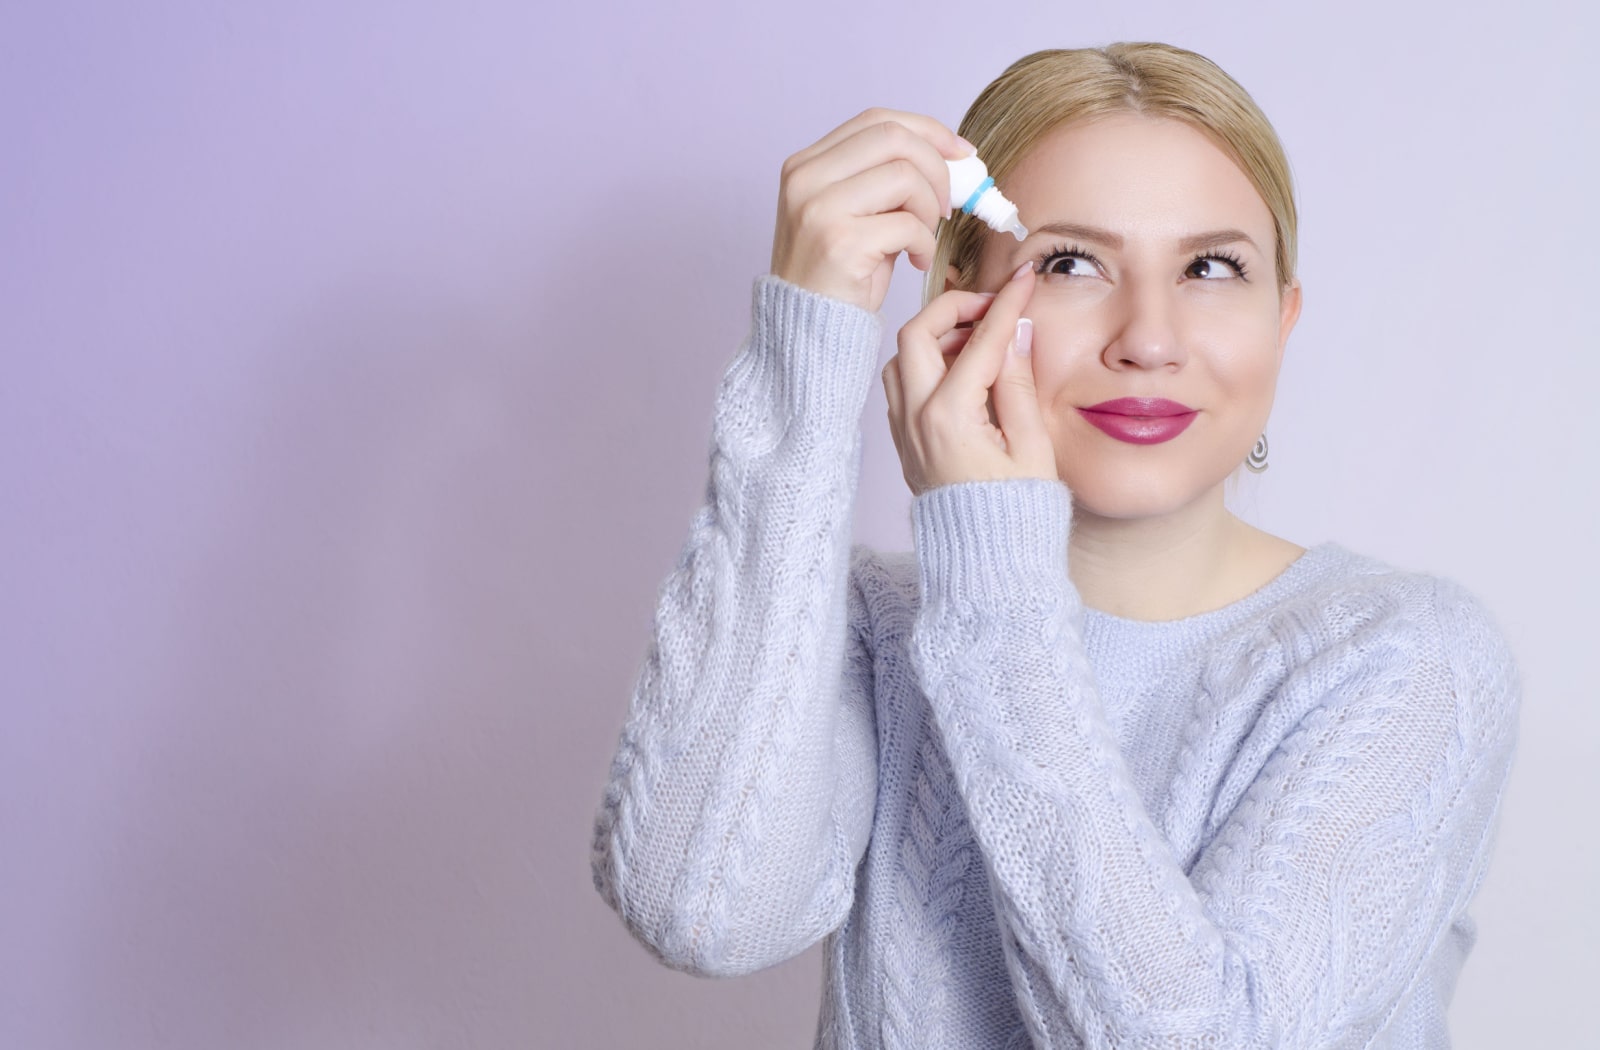 A woman wearing a lavender coloured sweater, holding her eye open to put eye drops in her eye